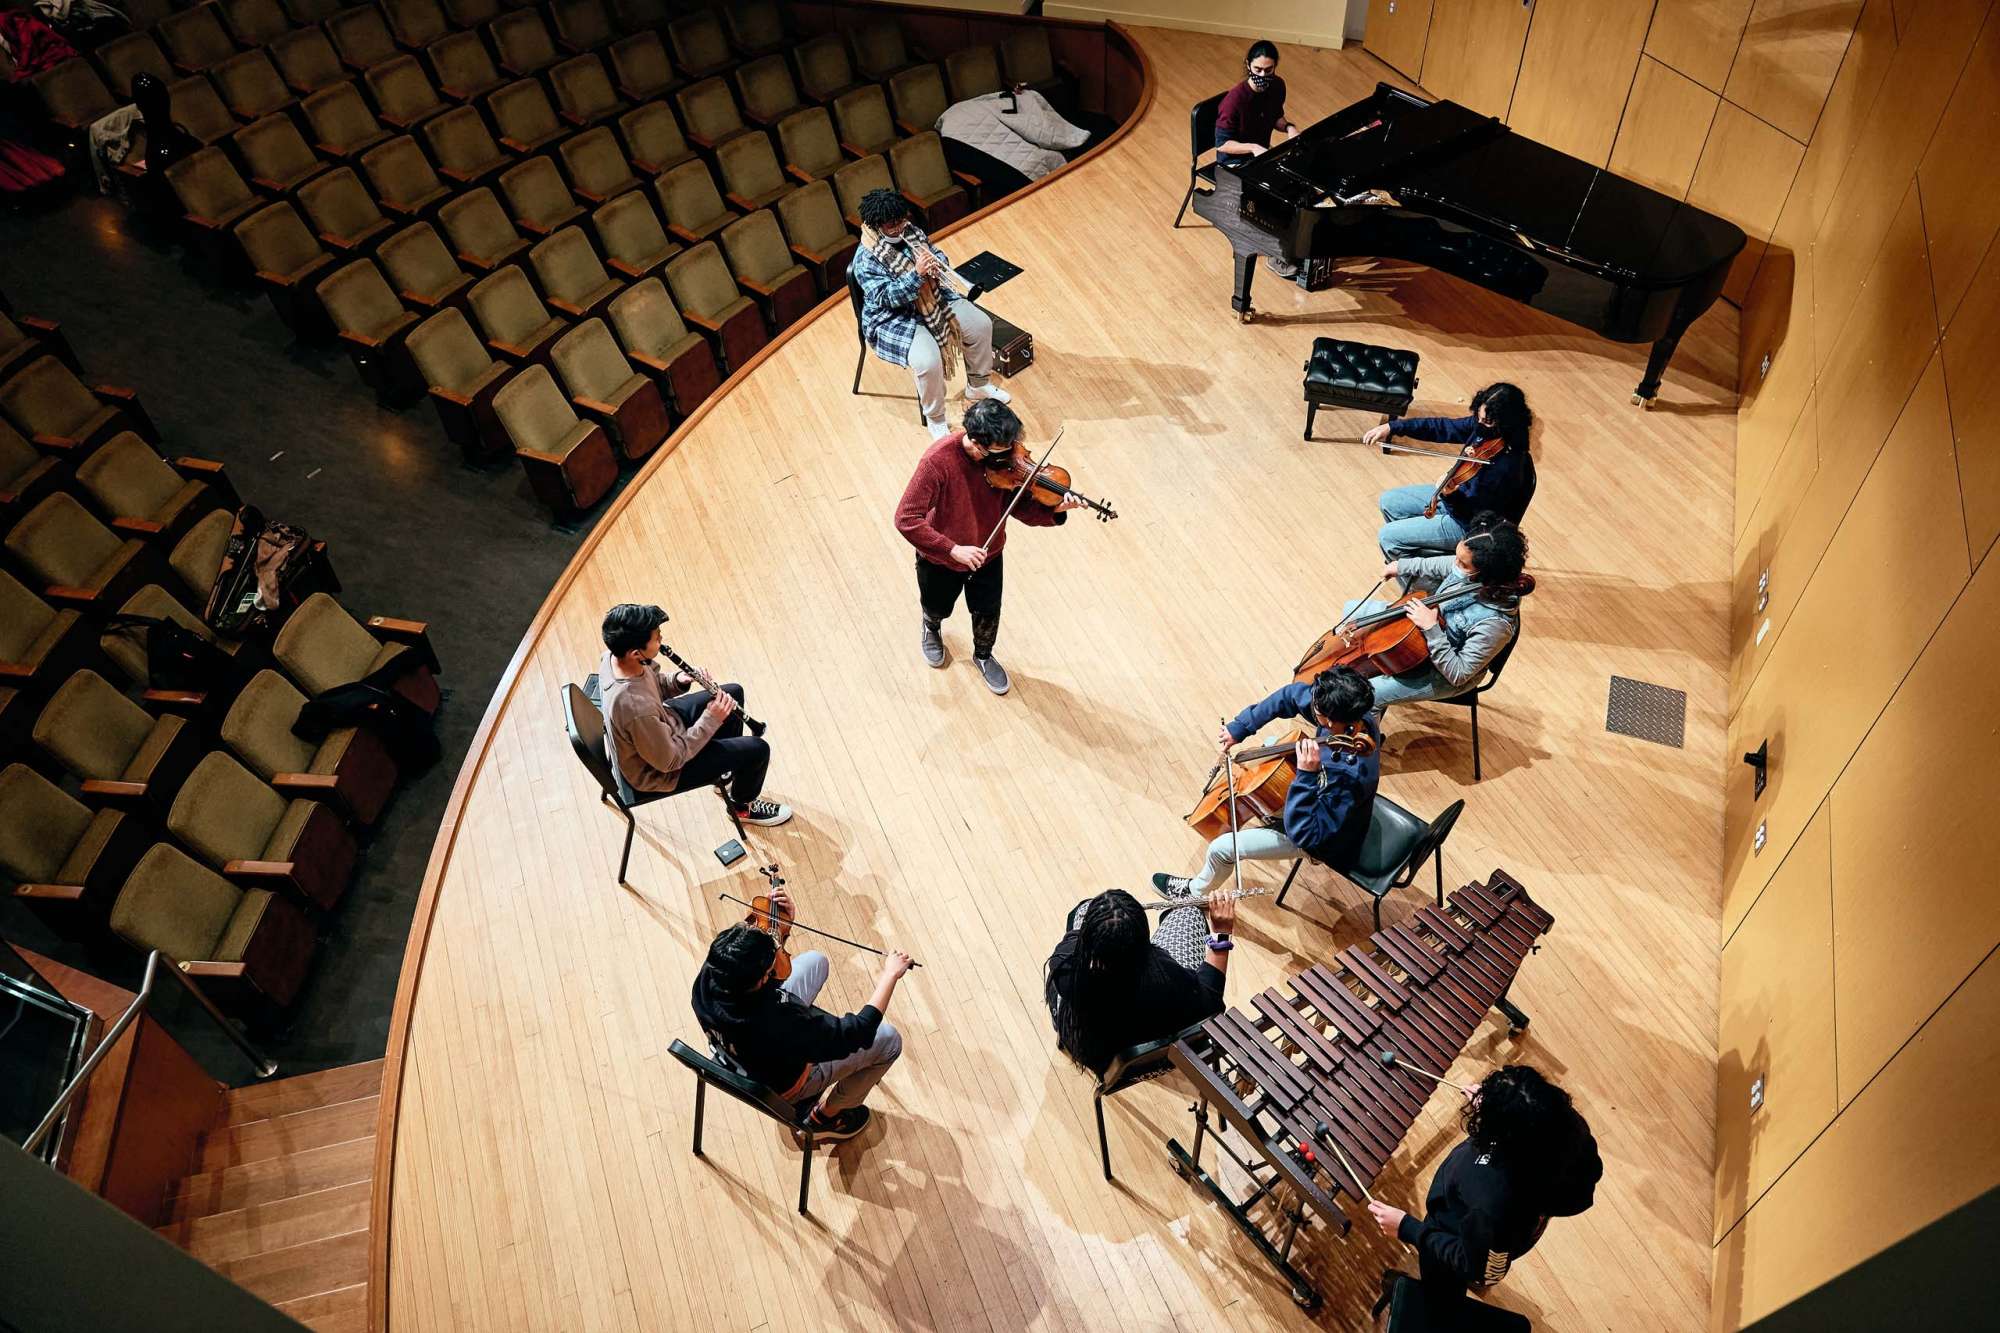 Overhead view of musicians on stage.